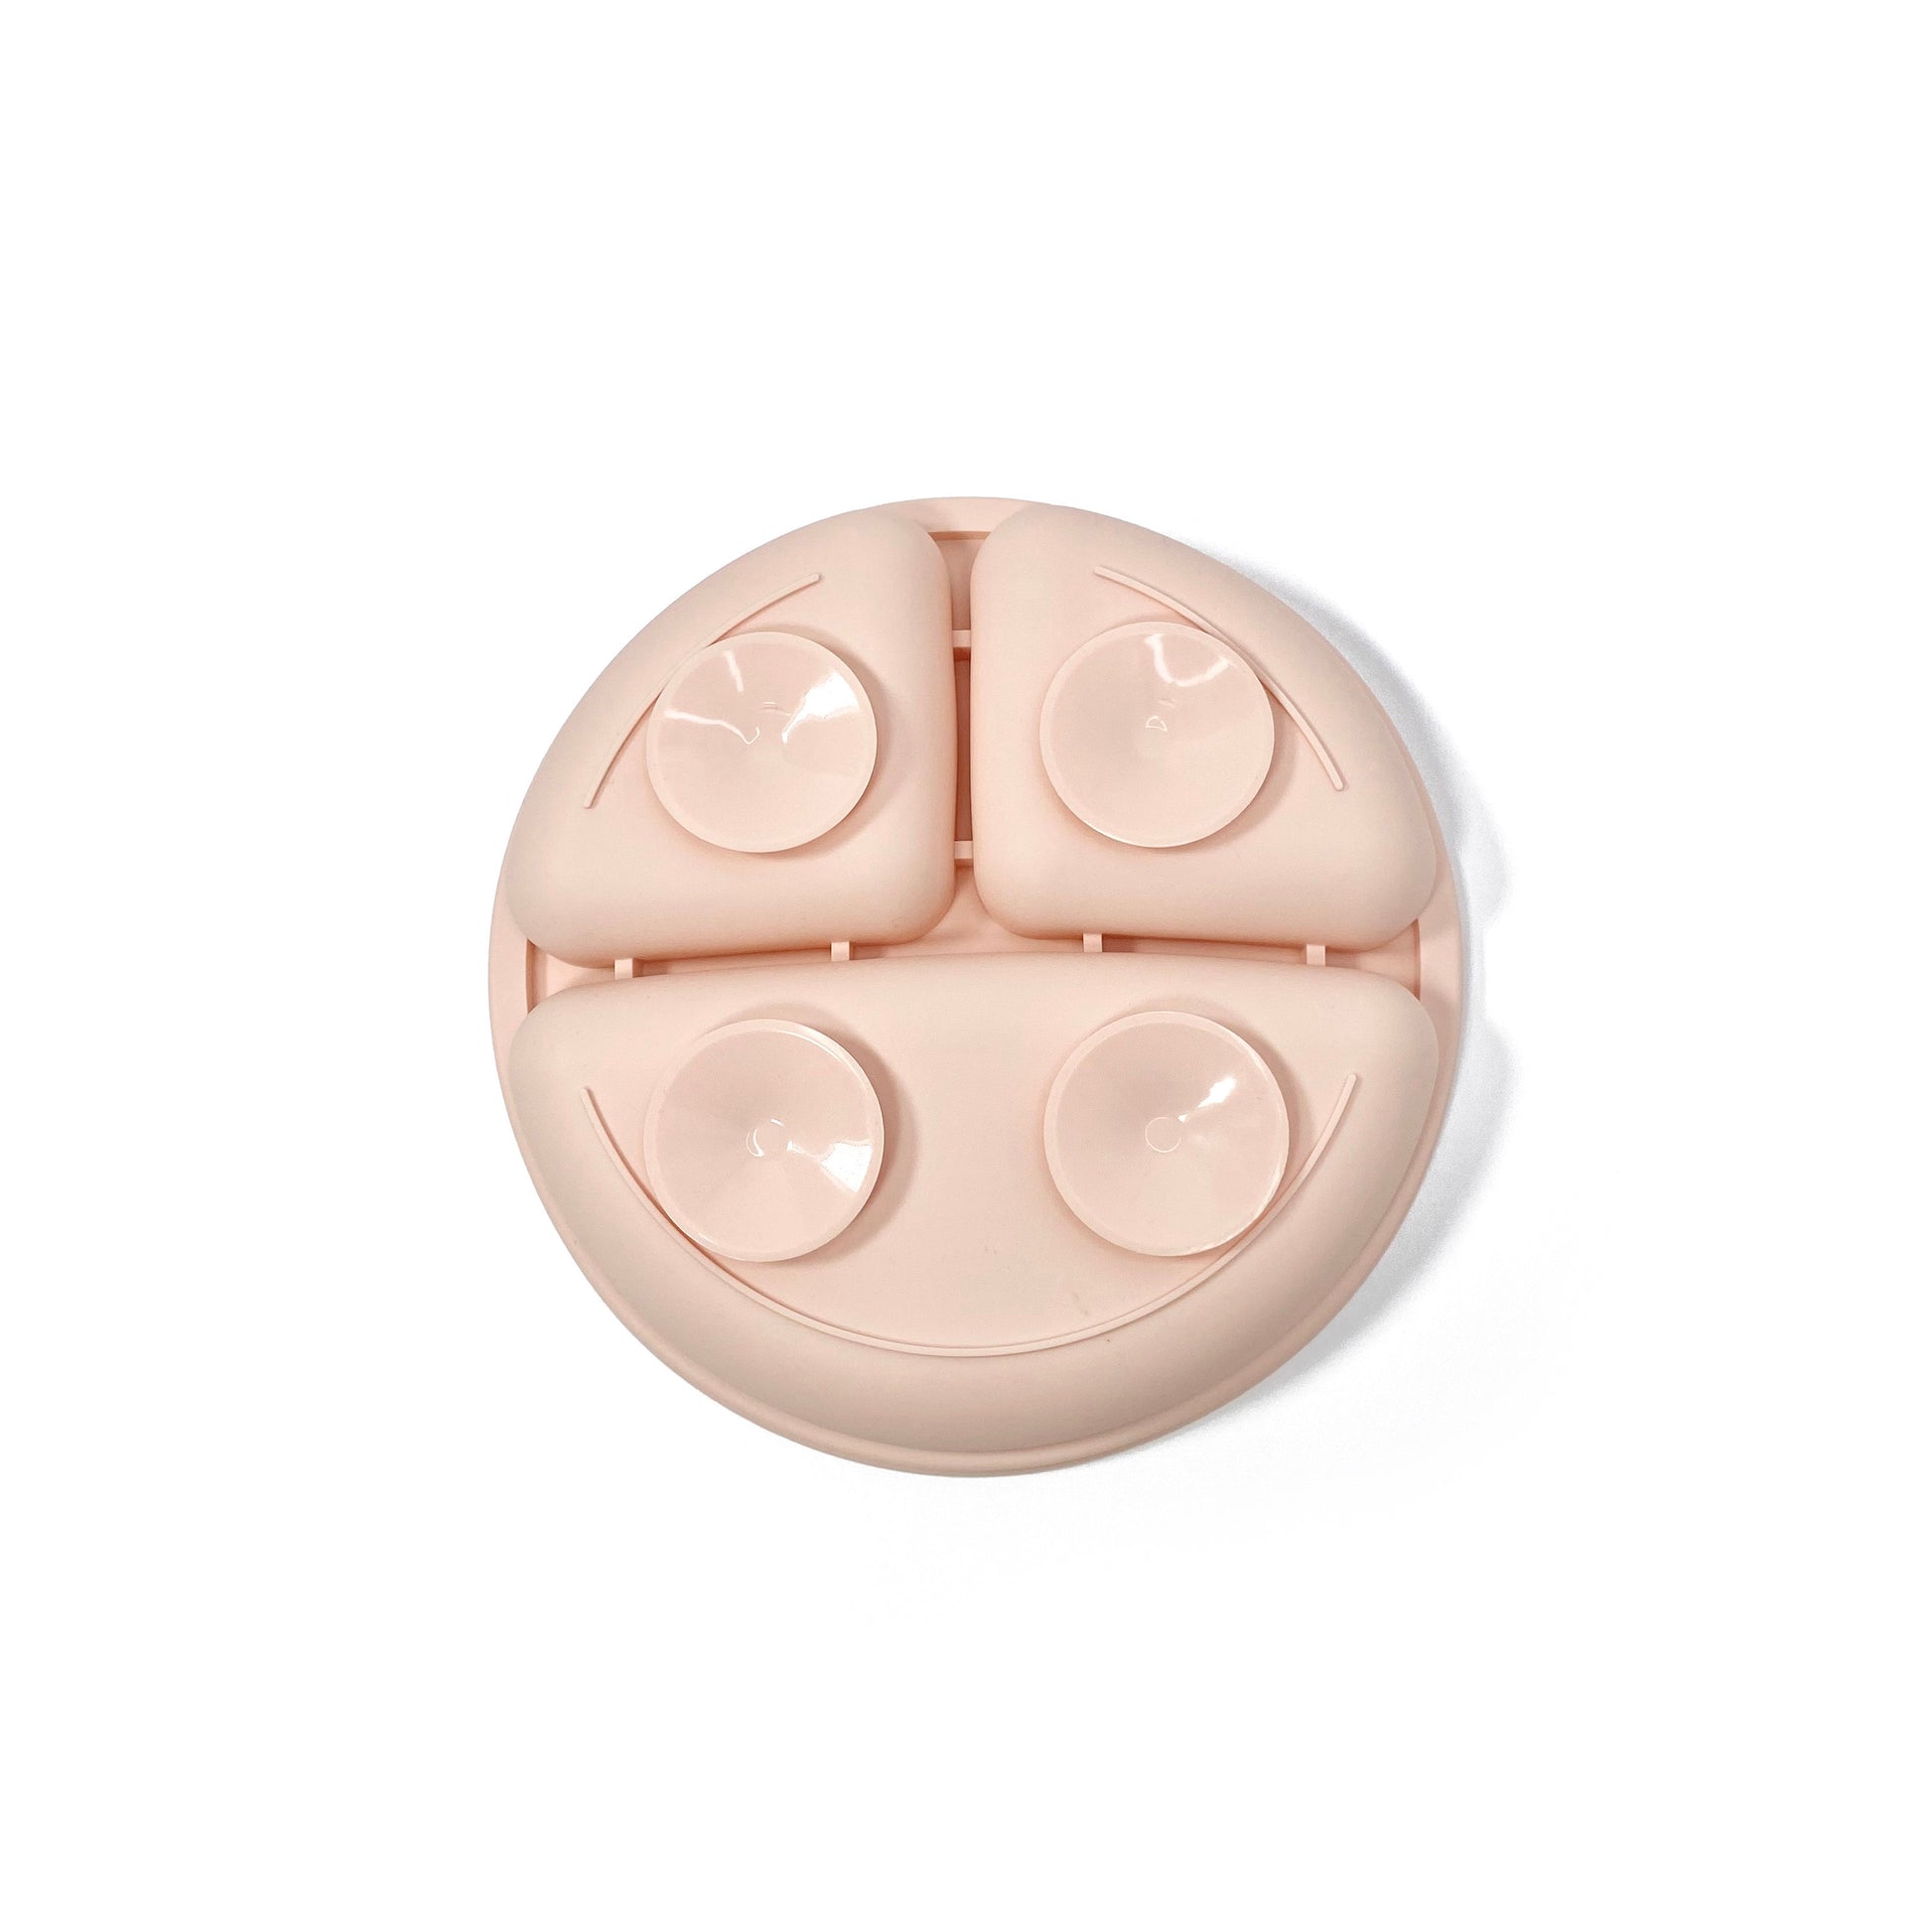 A peachy pink silicone children’s section plate with suction cups on the base. View shows the underside of the plate.